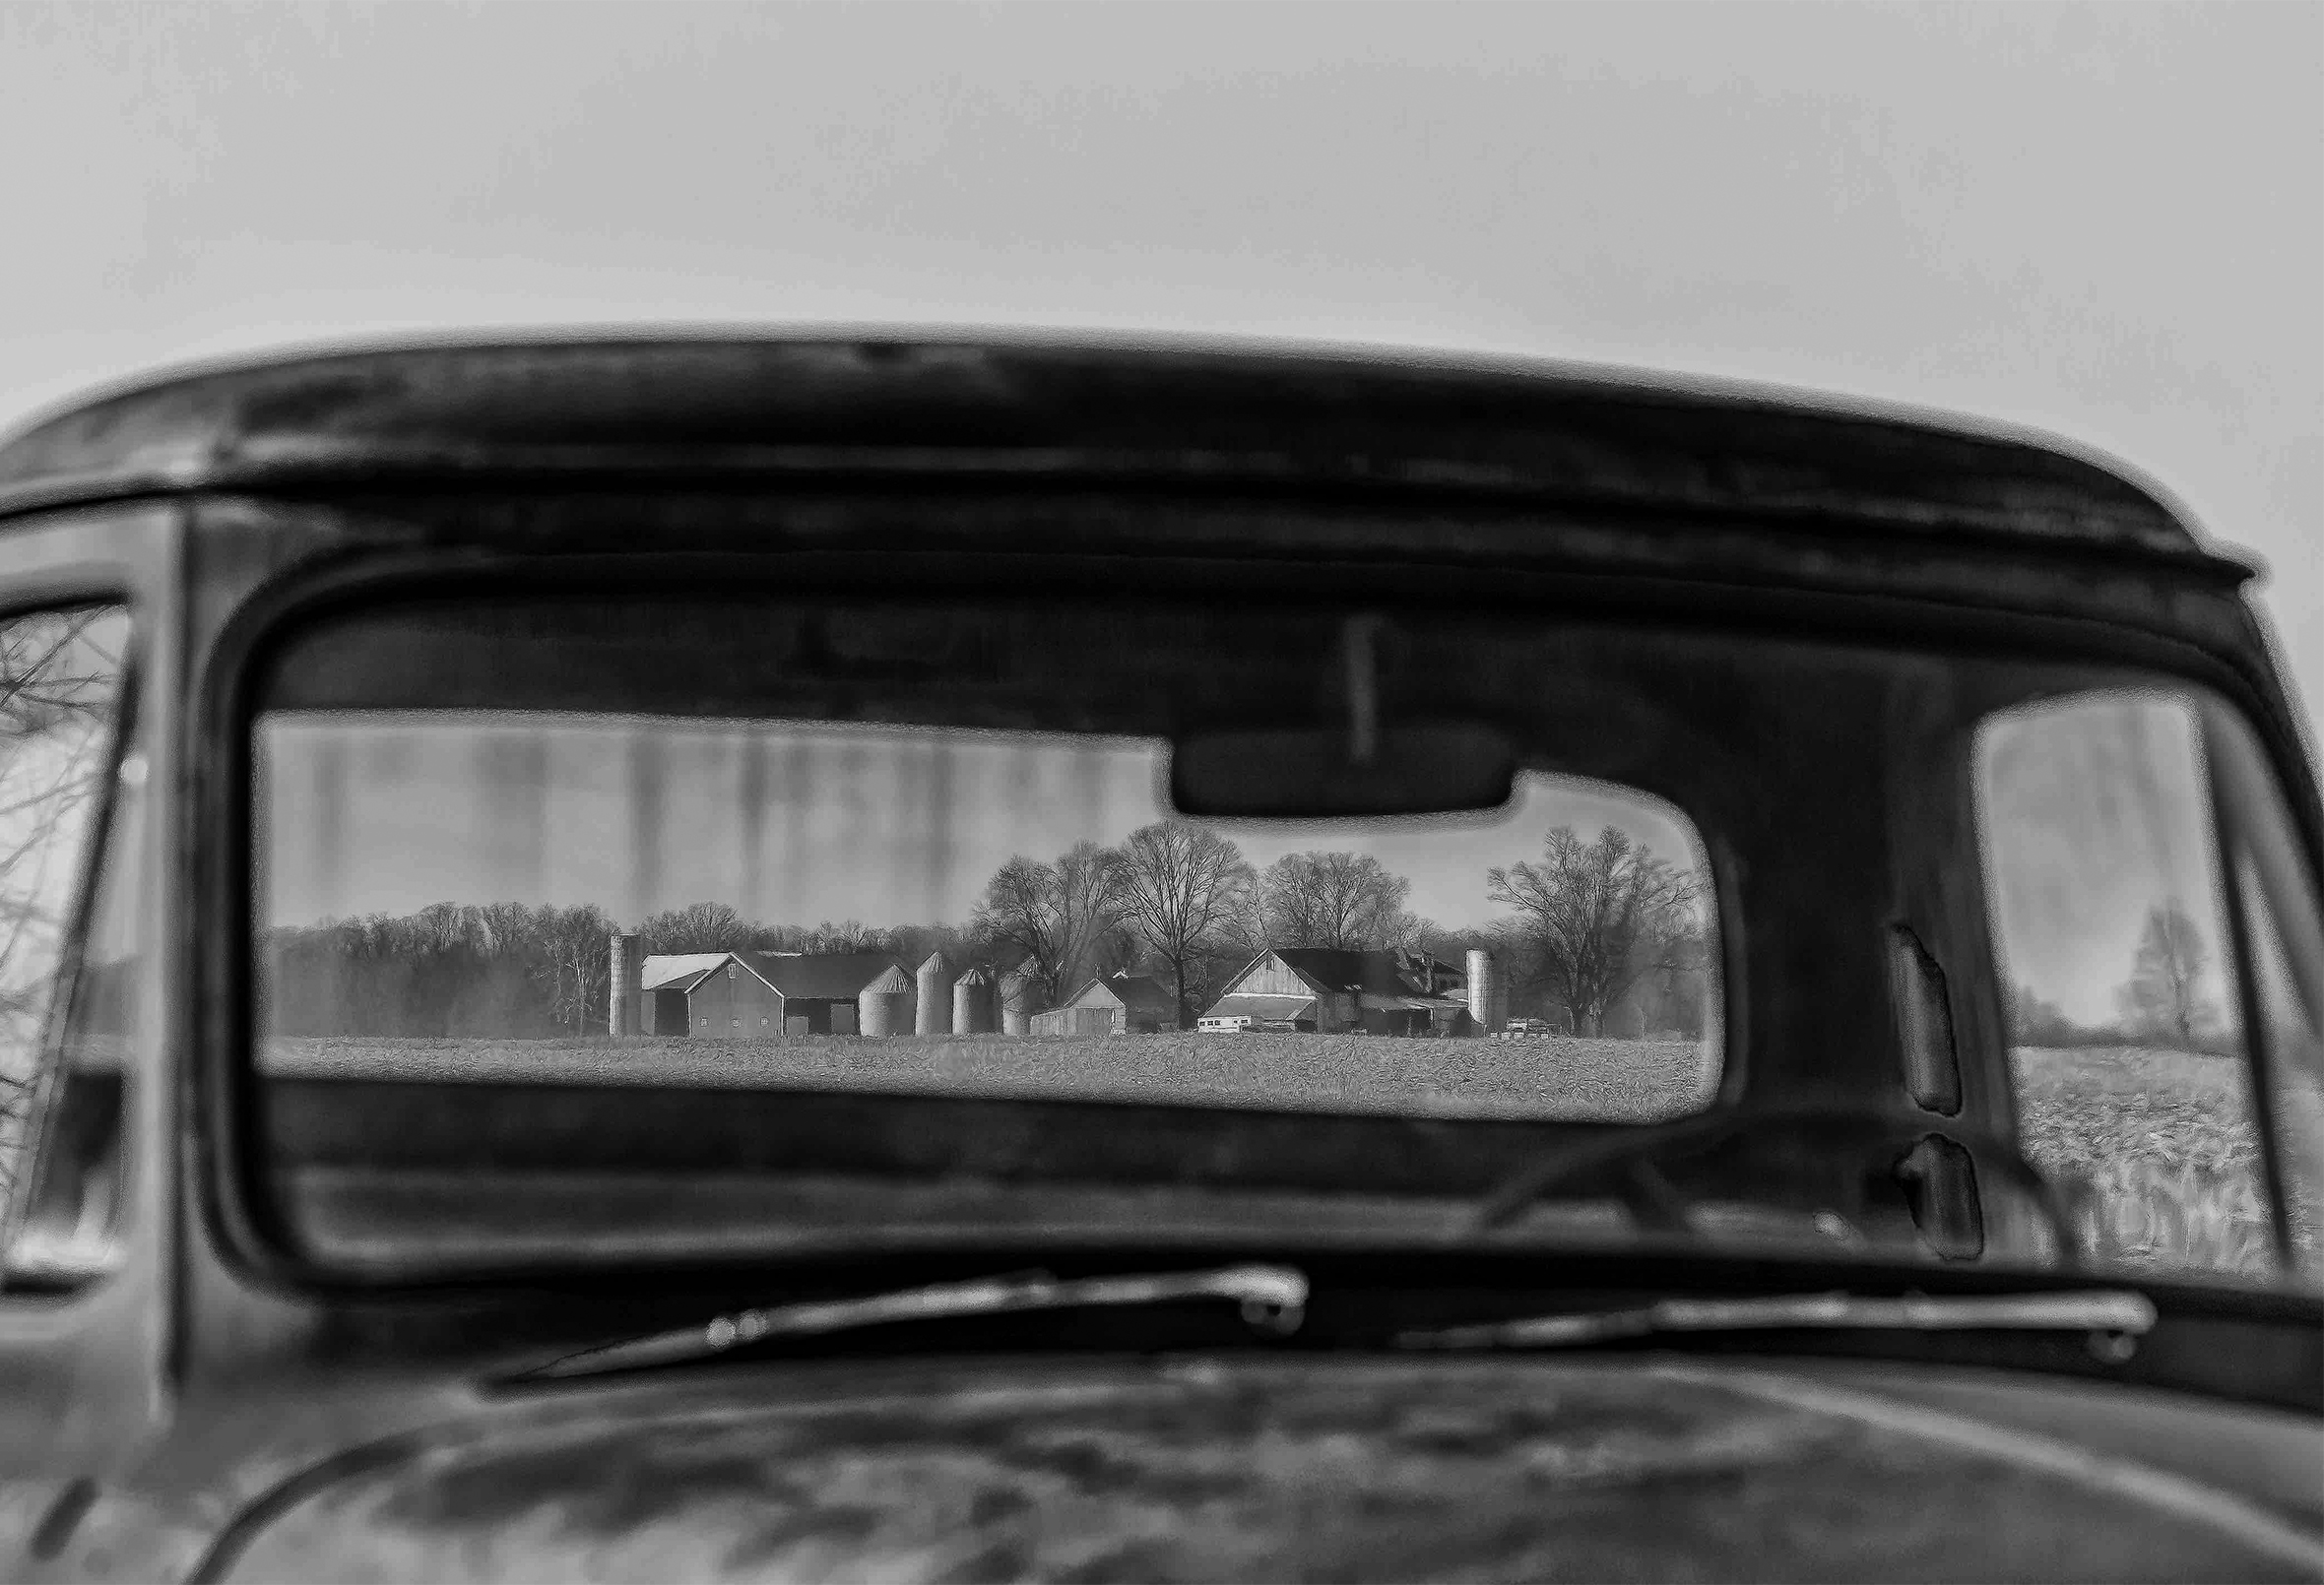 Farmstead in rural Indiana seen through the windshields of a truck: through front then back.